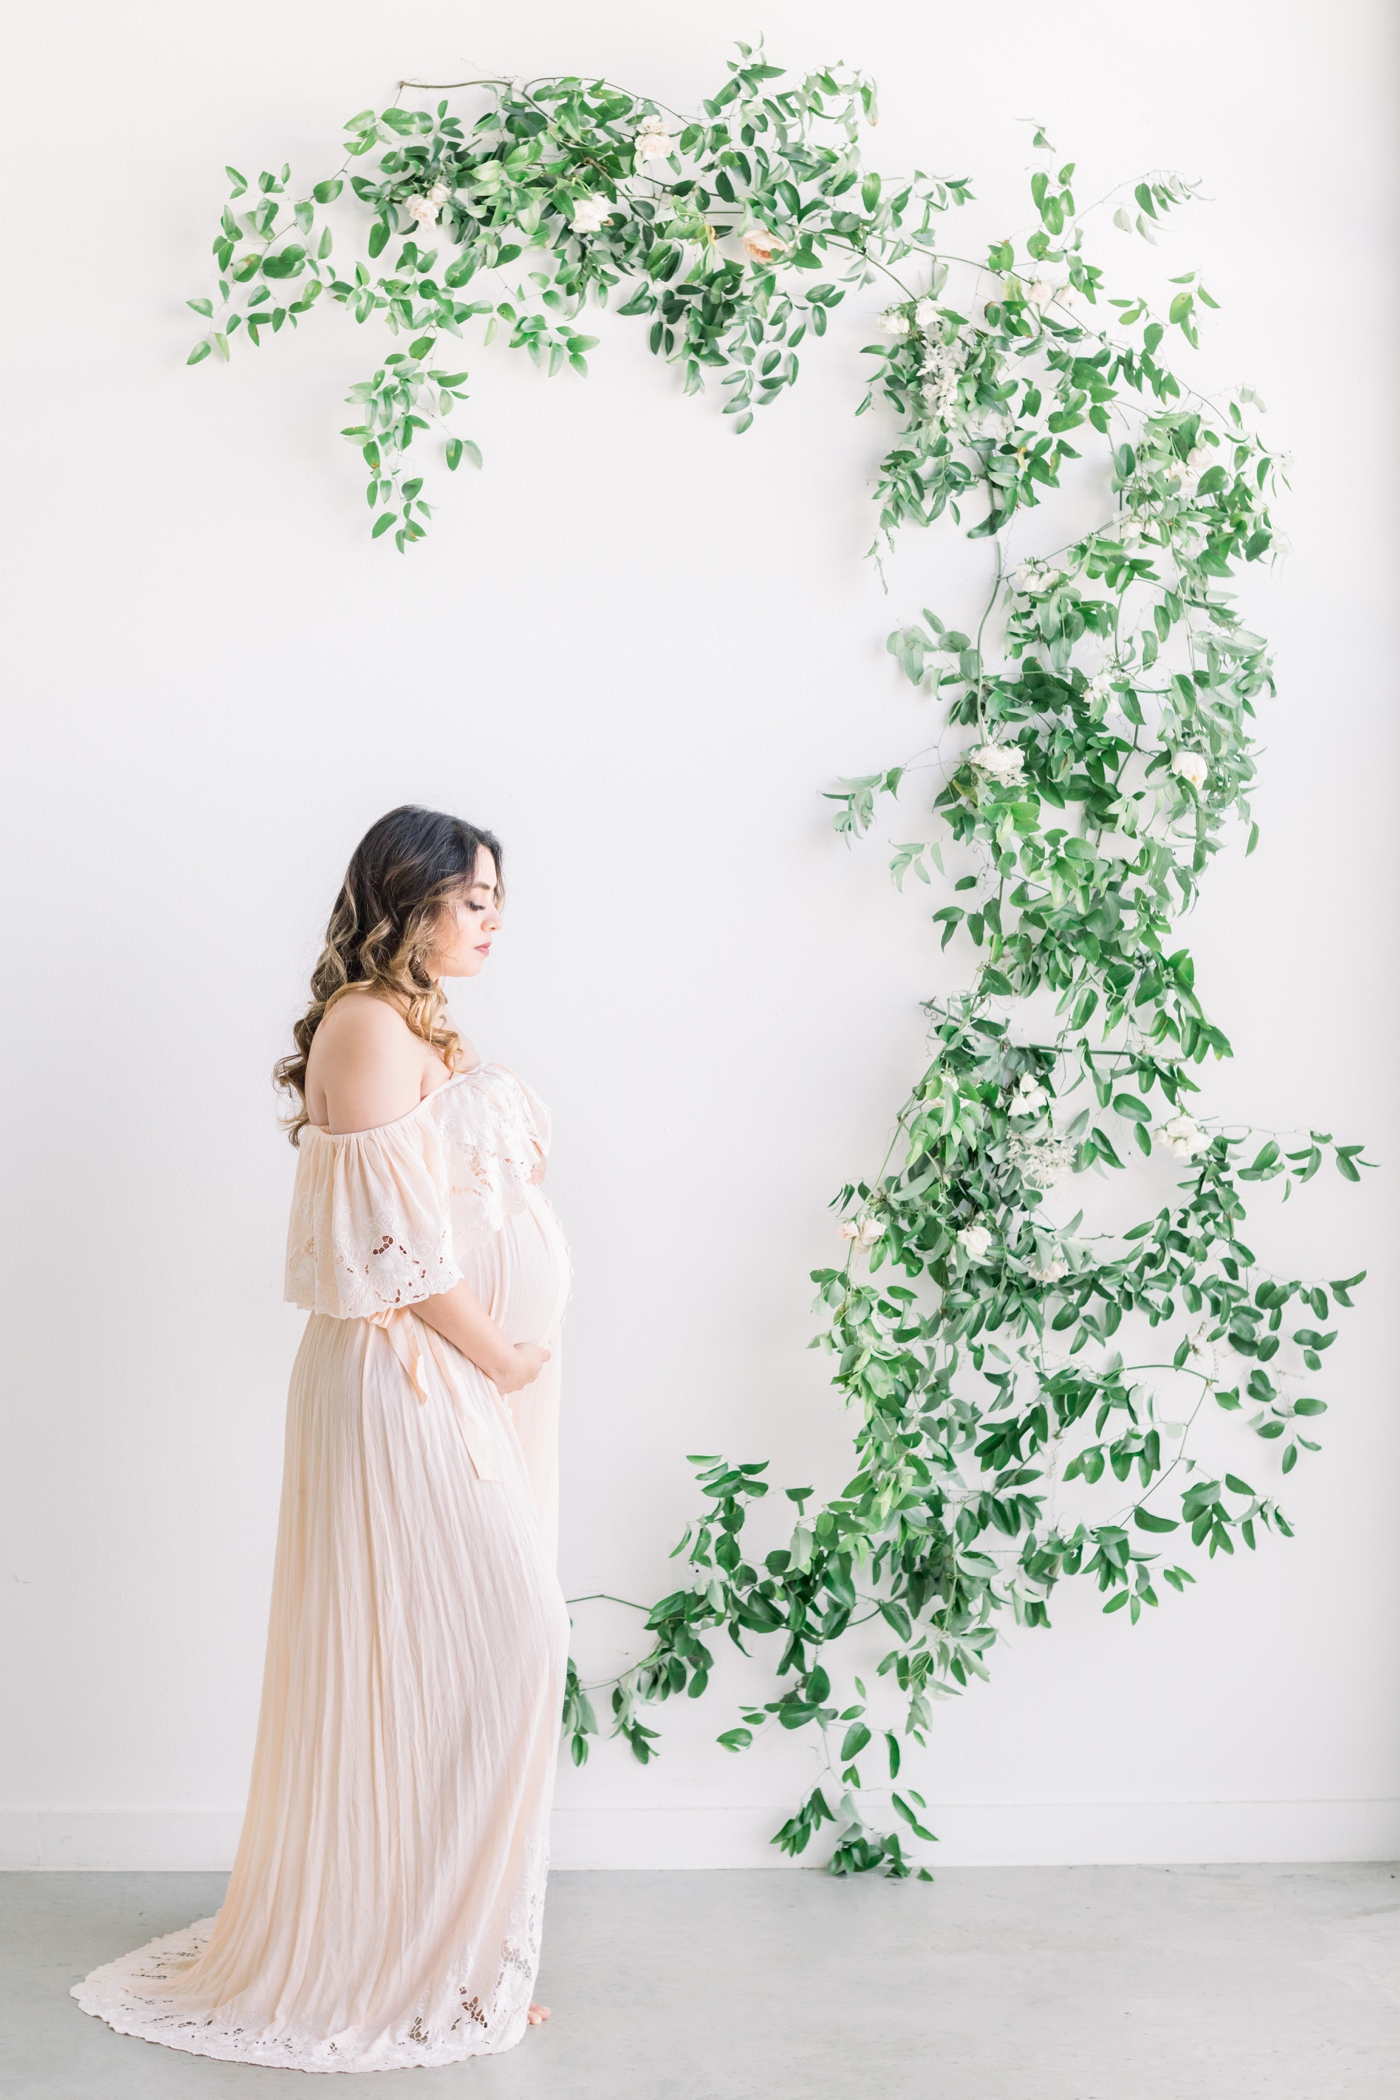 Mom in Fillyboo maxi dress during studio maternity session with florals in the background. Photo by Sana Ahmed Photography.